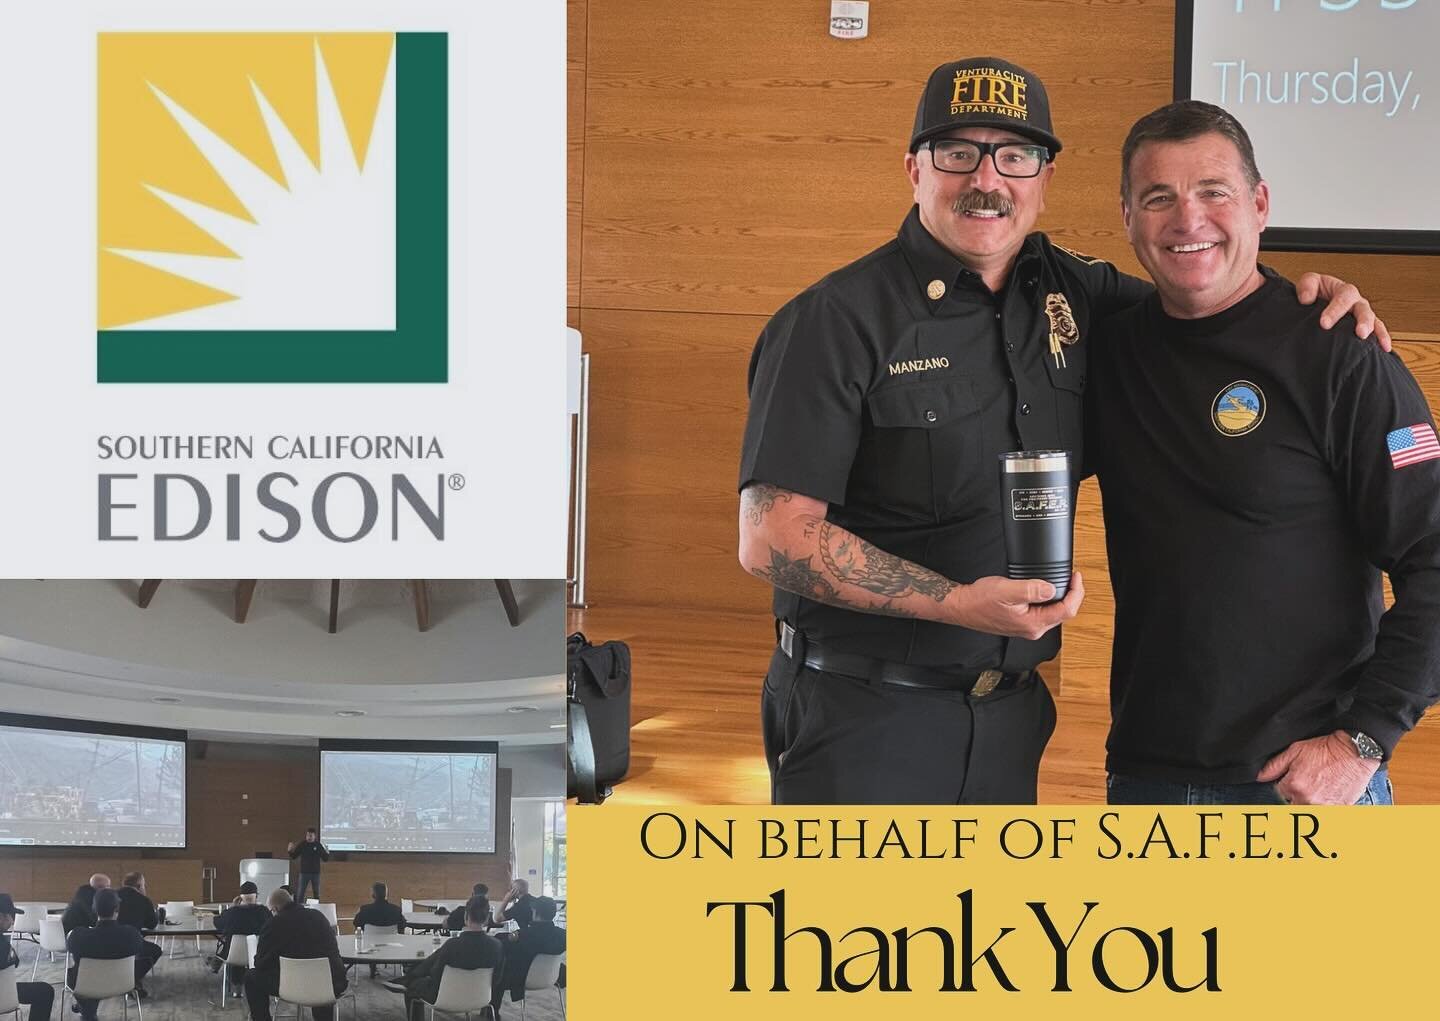 Grateful to @costamesafirerescue for hosting an insightful S.A.F.E.R meeting on Electrical Safety. Special thanks to SCE Senior Fire Management Officers Scott Brown &amp; Kyle Gordon for sharing valuable insights. Your commitment to community safety 